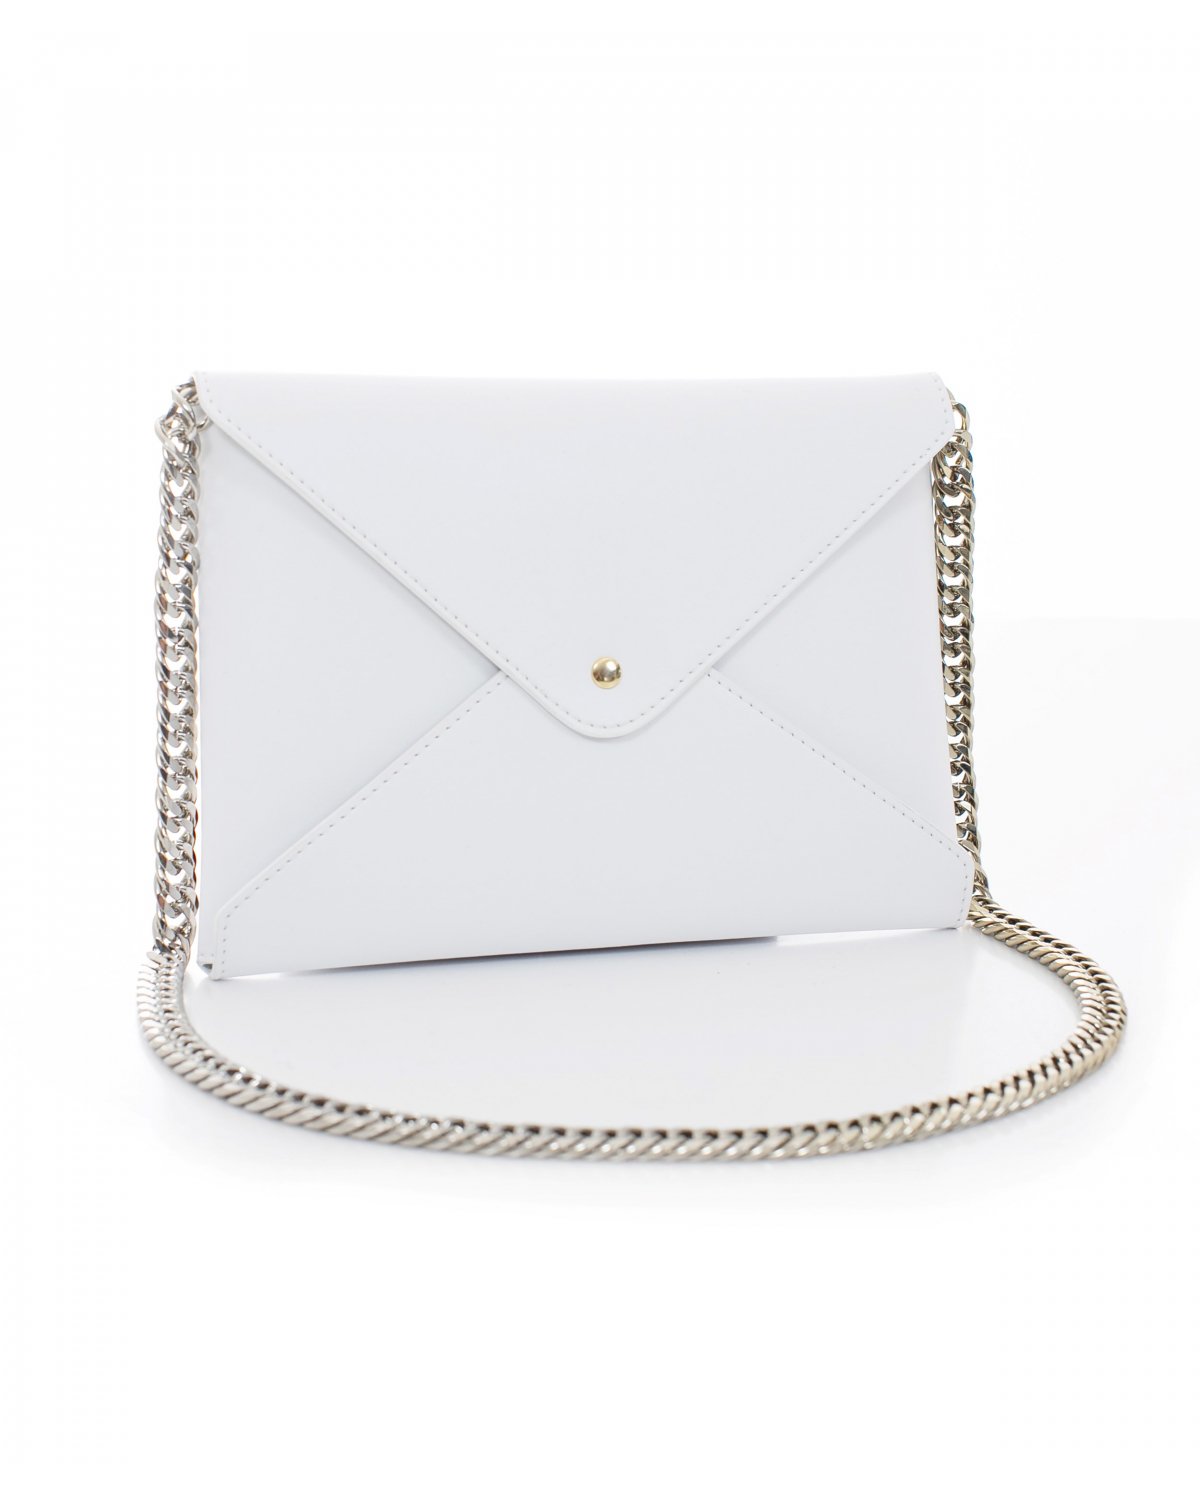 White appleskin minibag | Accessories, Bags | Genny